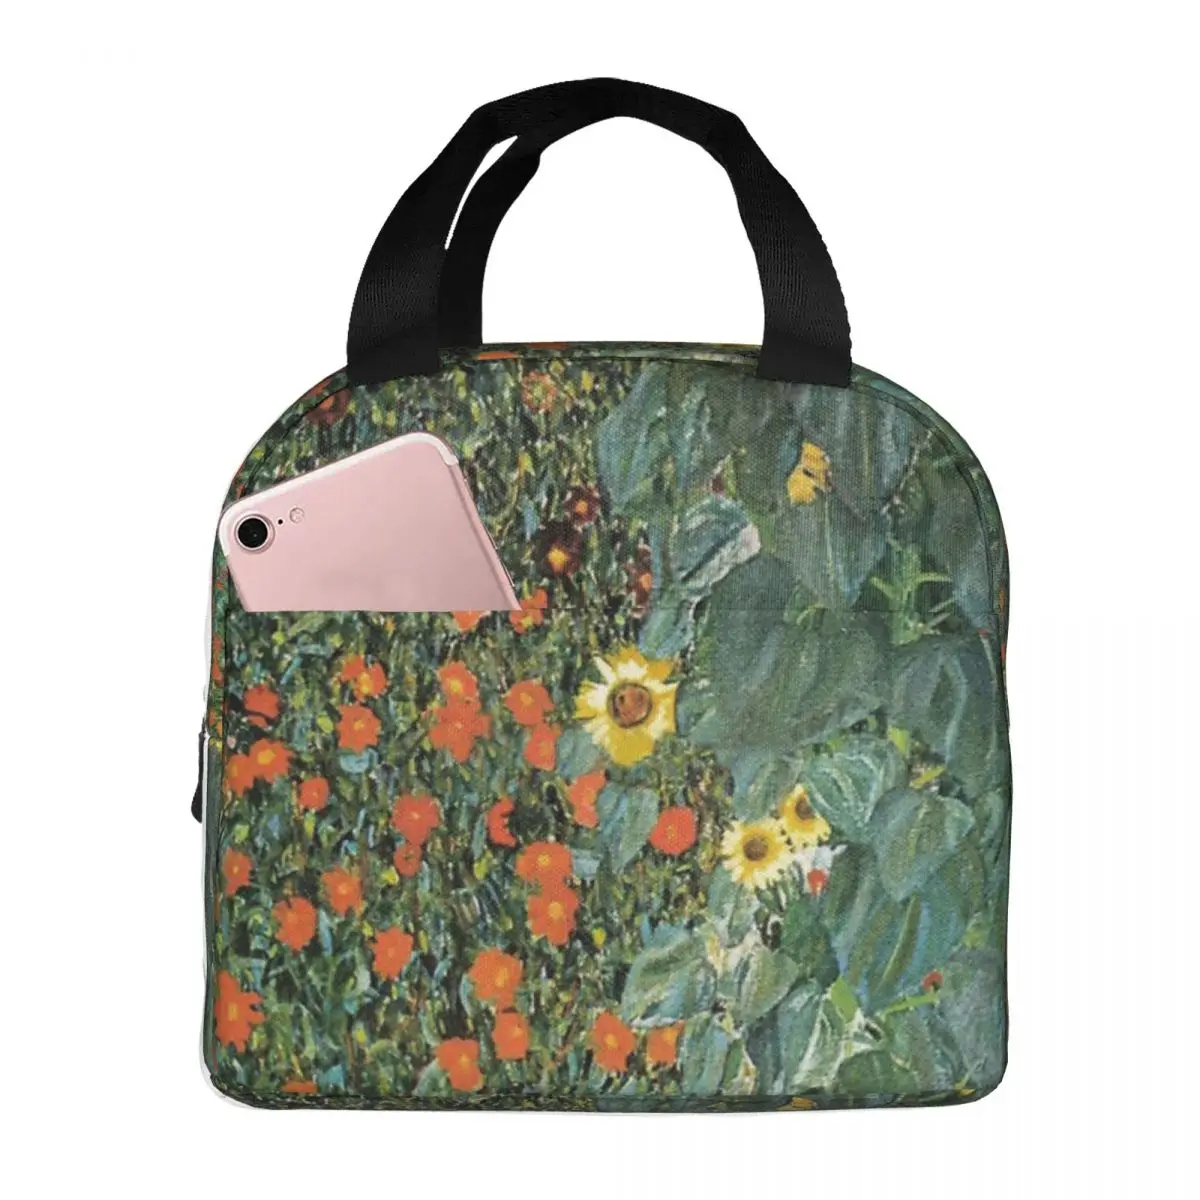 Gustav Klimt The Sunflower Lunch Bags Waterproof Insulated Canvas Cooler Bag Thermal Food Picnic Work Lunch Box for Women Girl